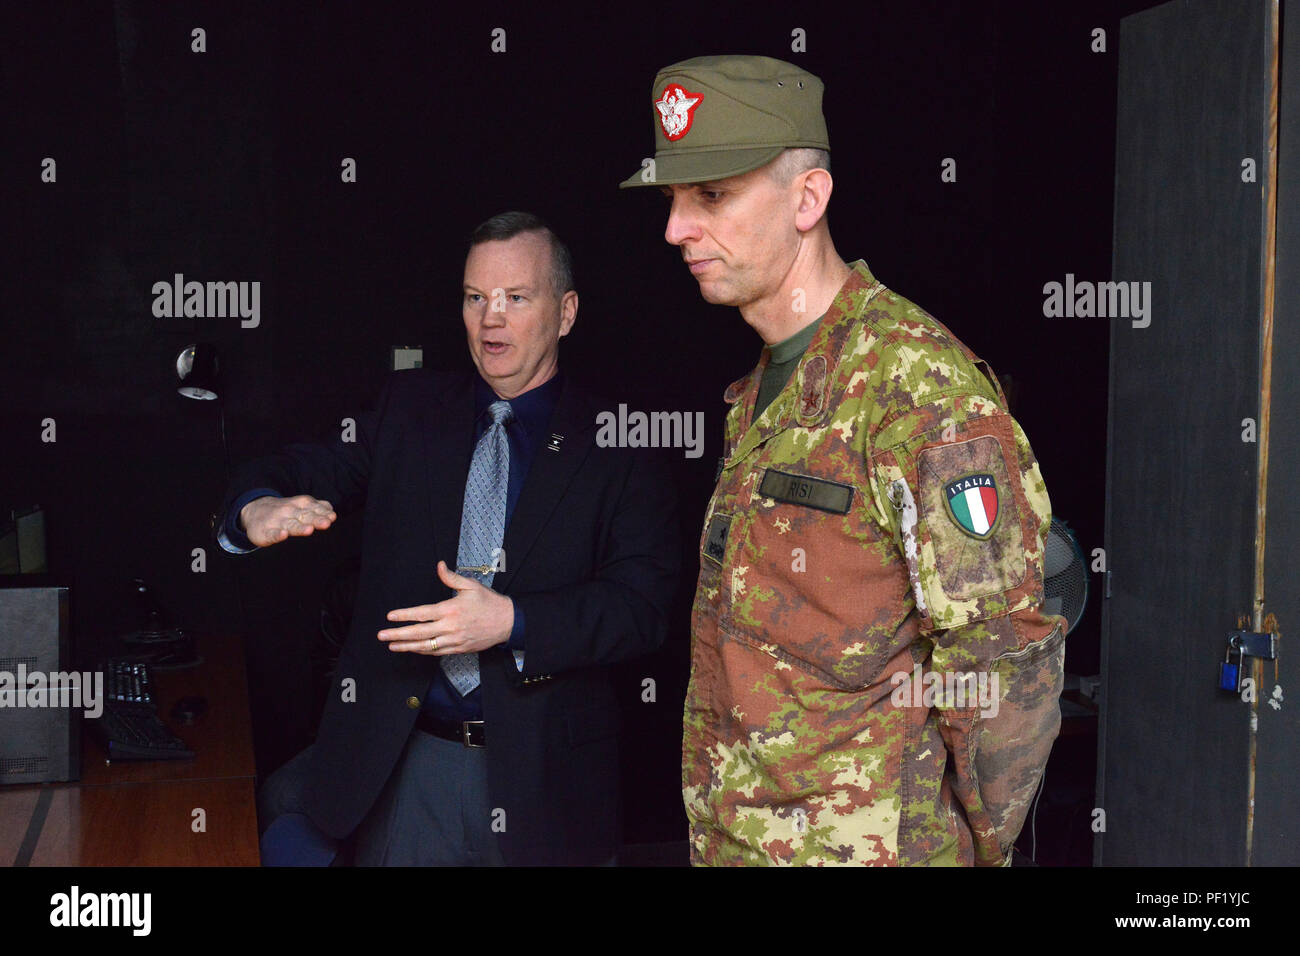 From left, James V. Matheson, Chief, U.S. Army Regional Training Support Division, shows  the Call For Fire Trainer system (CFFT) to Italian Army Brig. Gen. Michele Risi, Multinational Land Force “Julia” Alpine Brigade Commander, during the tour at RTSD South in Caserma Ederle, Vicenza, Italy, February 24, 2016. Italian Army visit U.S. Army RTSD South, in order to enhance to bilateral relations and to expand levels of cooperation and the capacity of the personnel involved in joint operations. (Photo by Visual Information Specialist Paolo Bovo/Released) Stock Photo